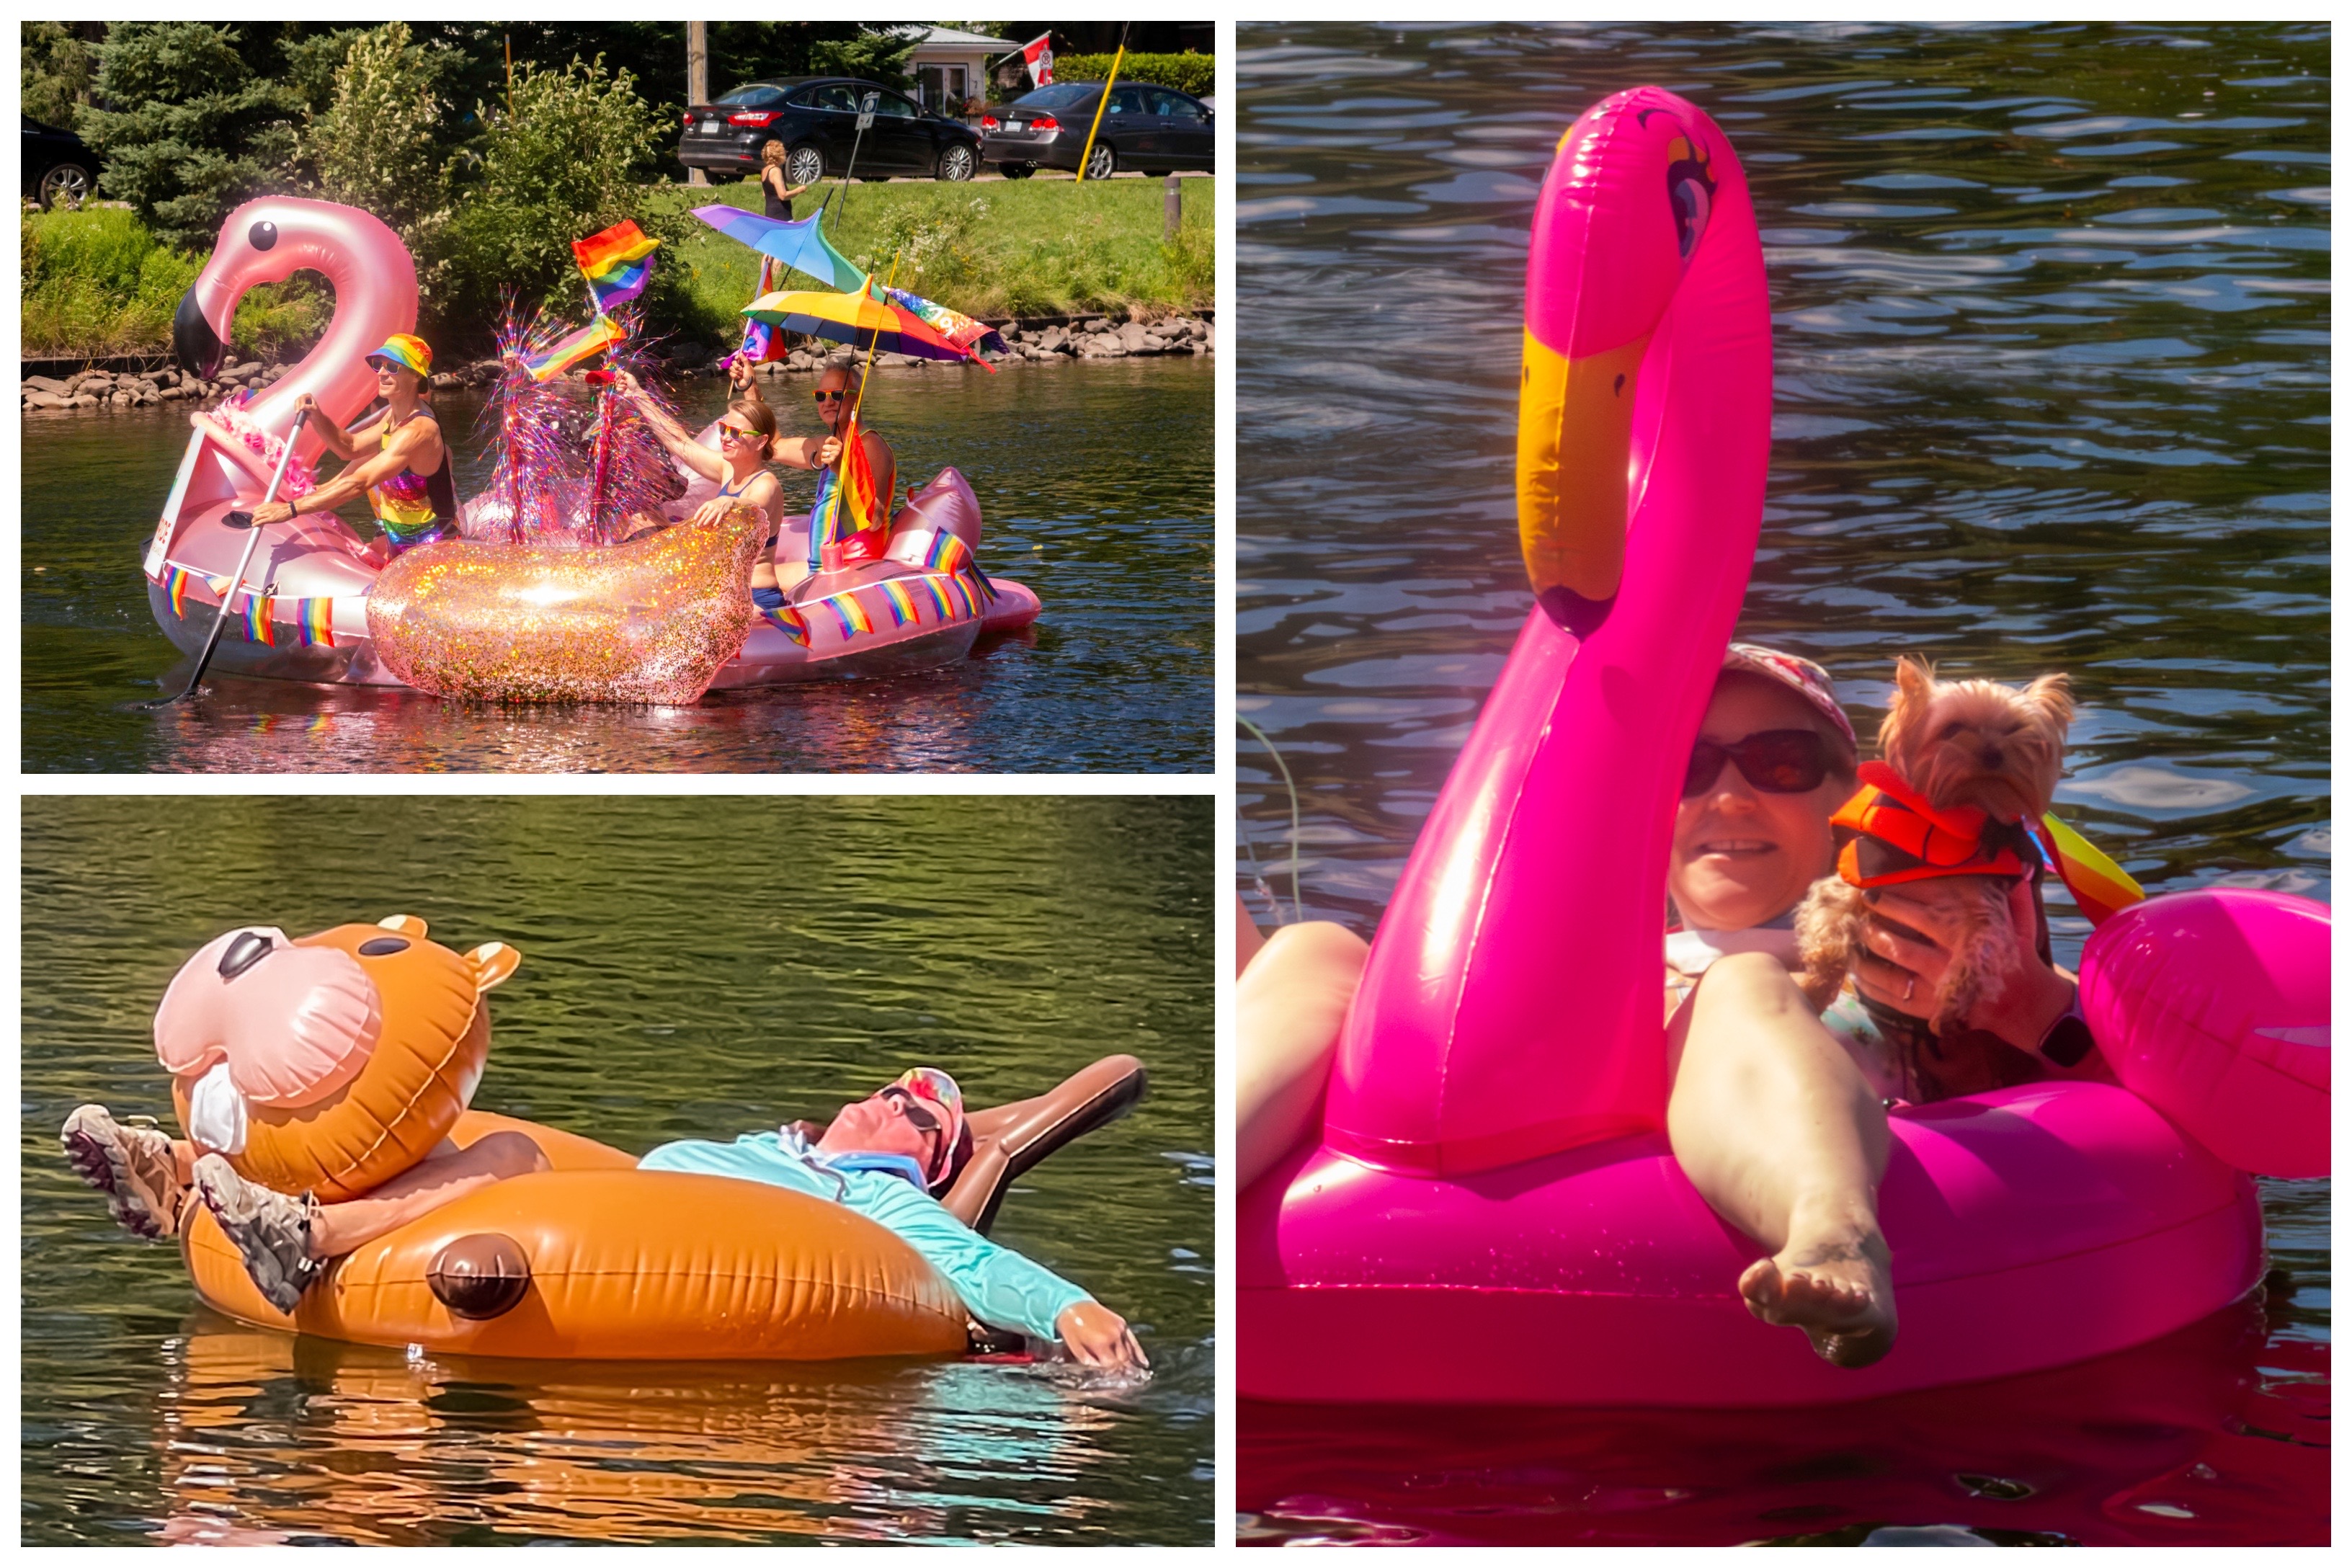 a collage of 3 photos of people happily floating down a river on large inflatable animal floats; one float shaped like a beaver and two shaped like pink flamingos